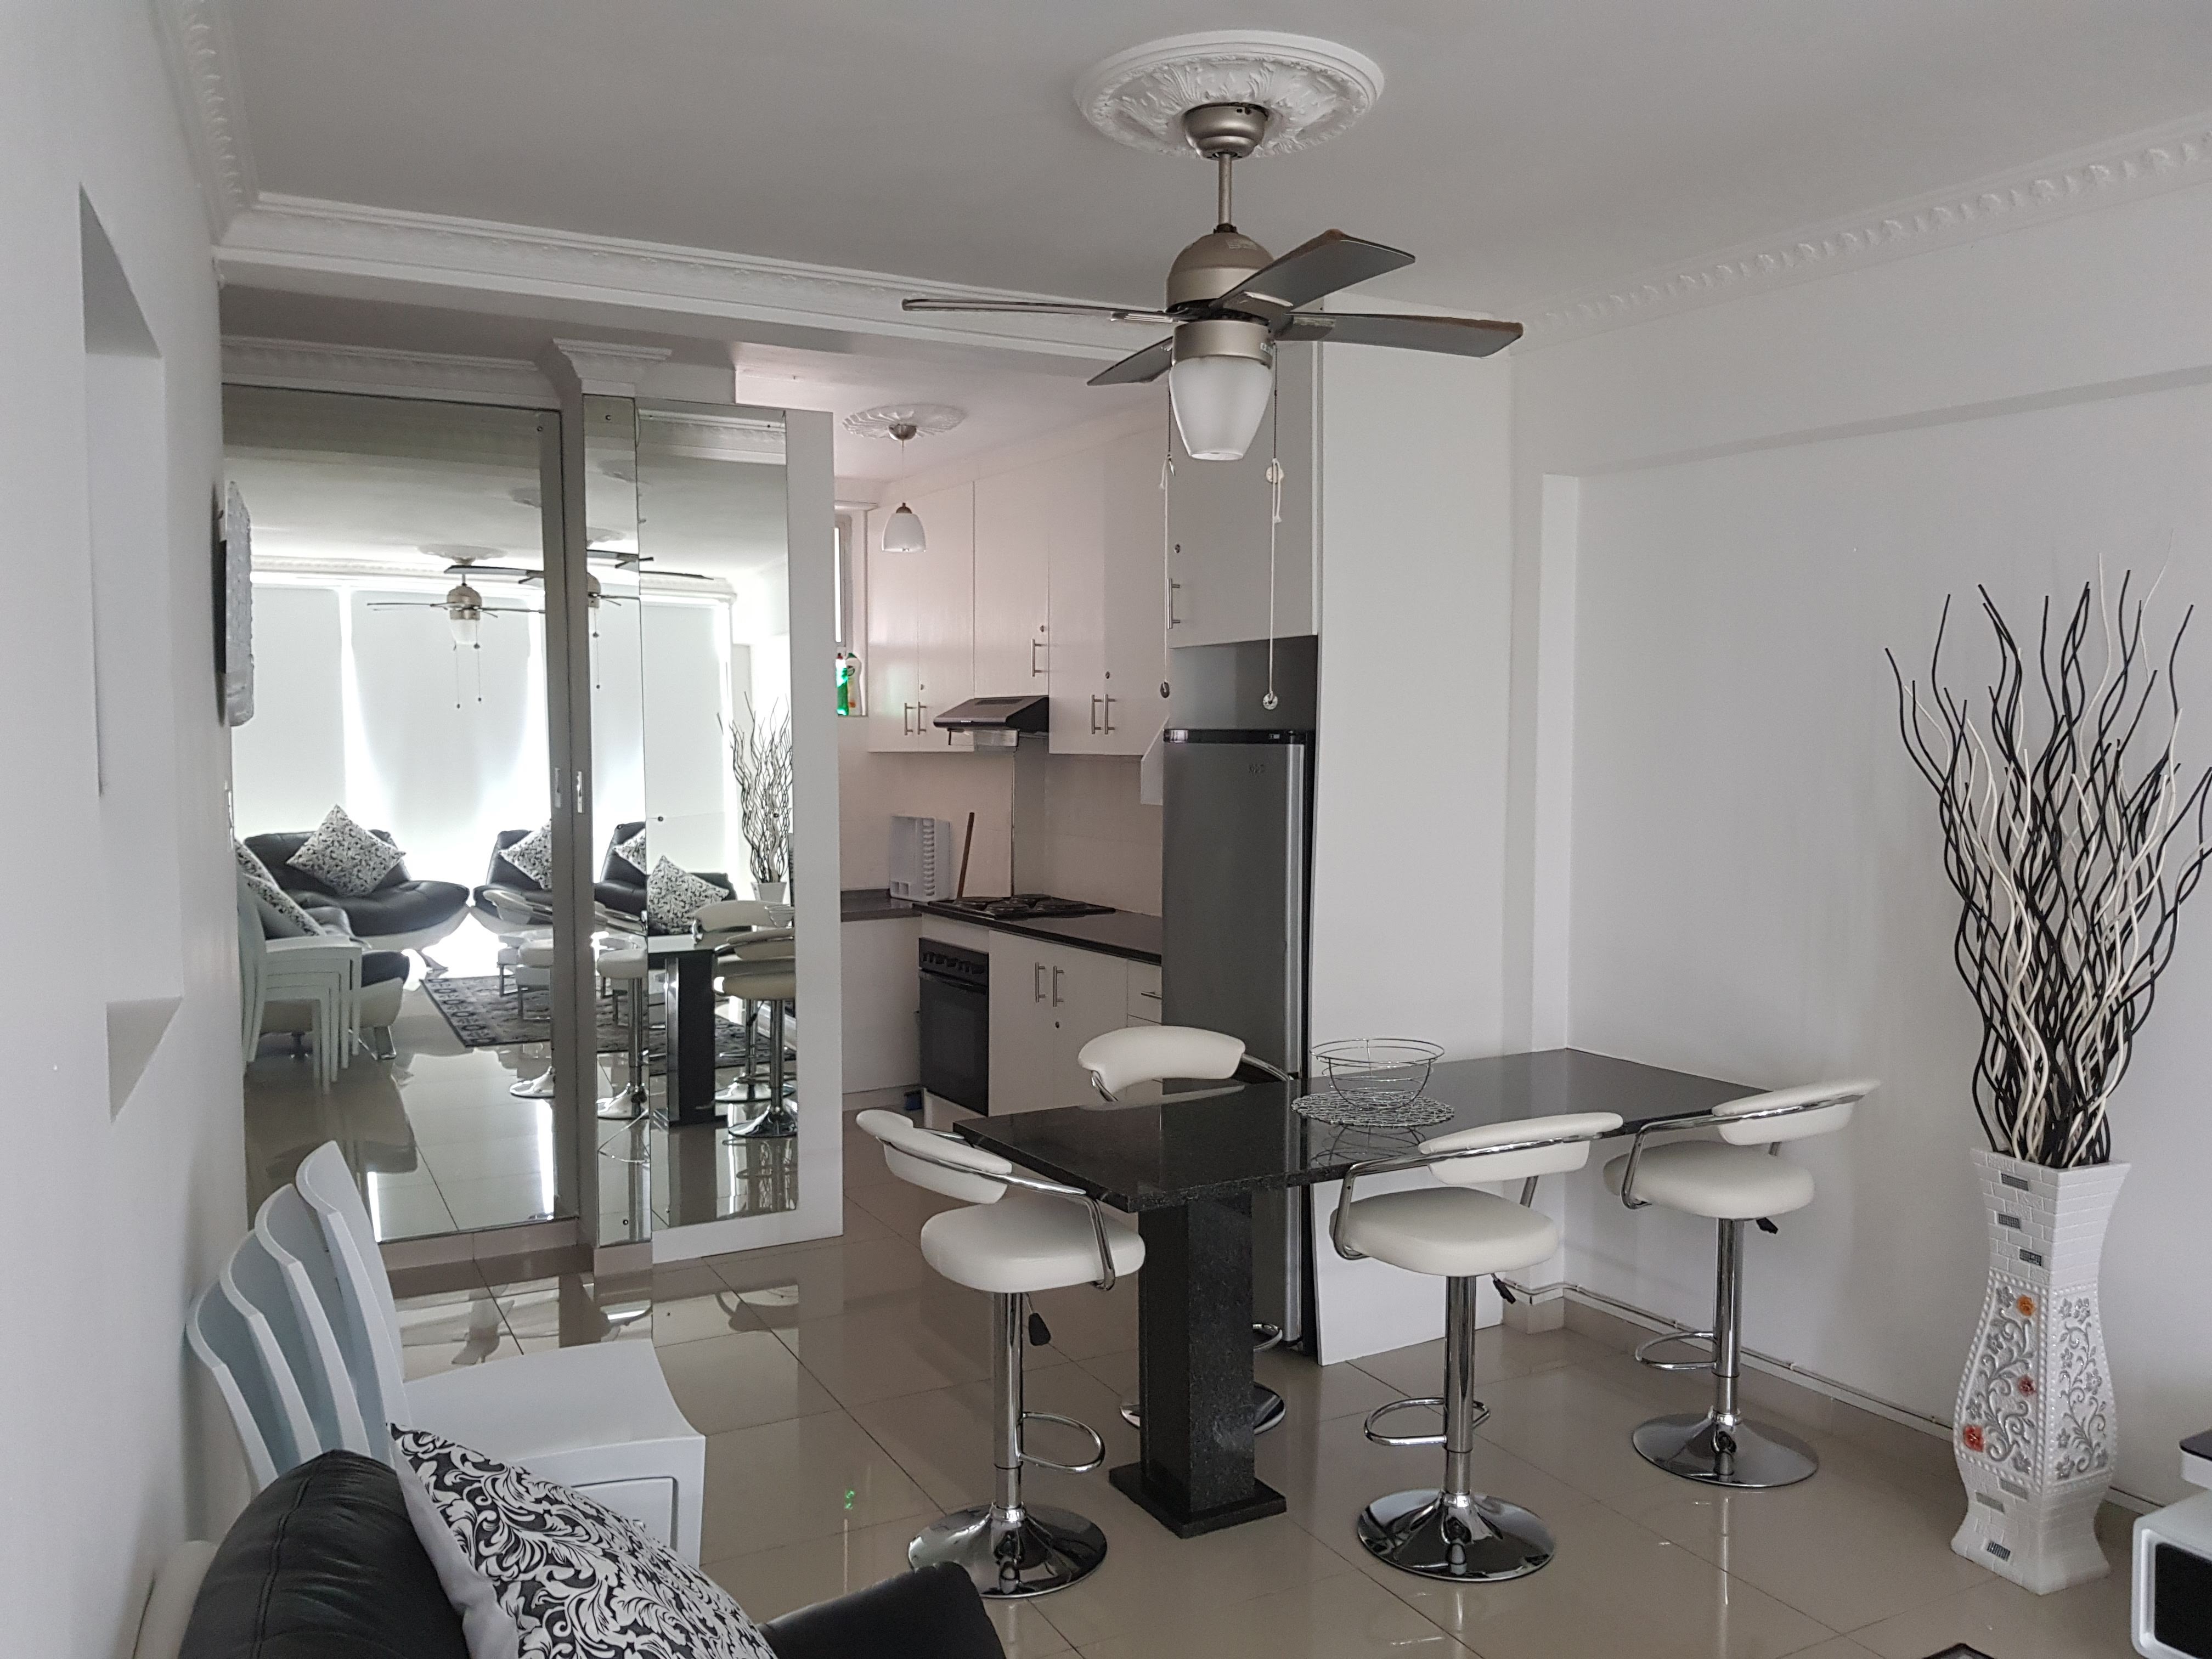 Marine Parade sea view holiday apartments. - Apartments for Rent in Durban,  KwaZulu-Natal, South Africa